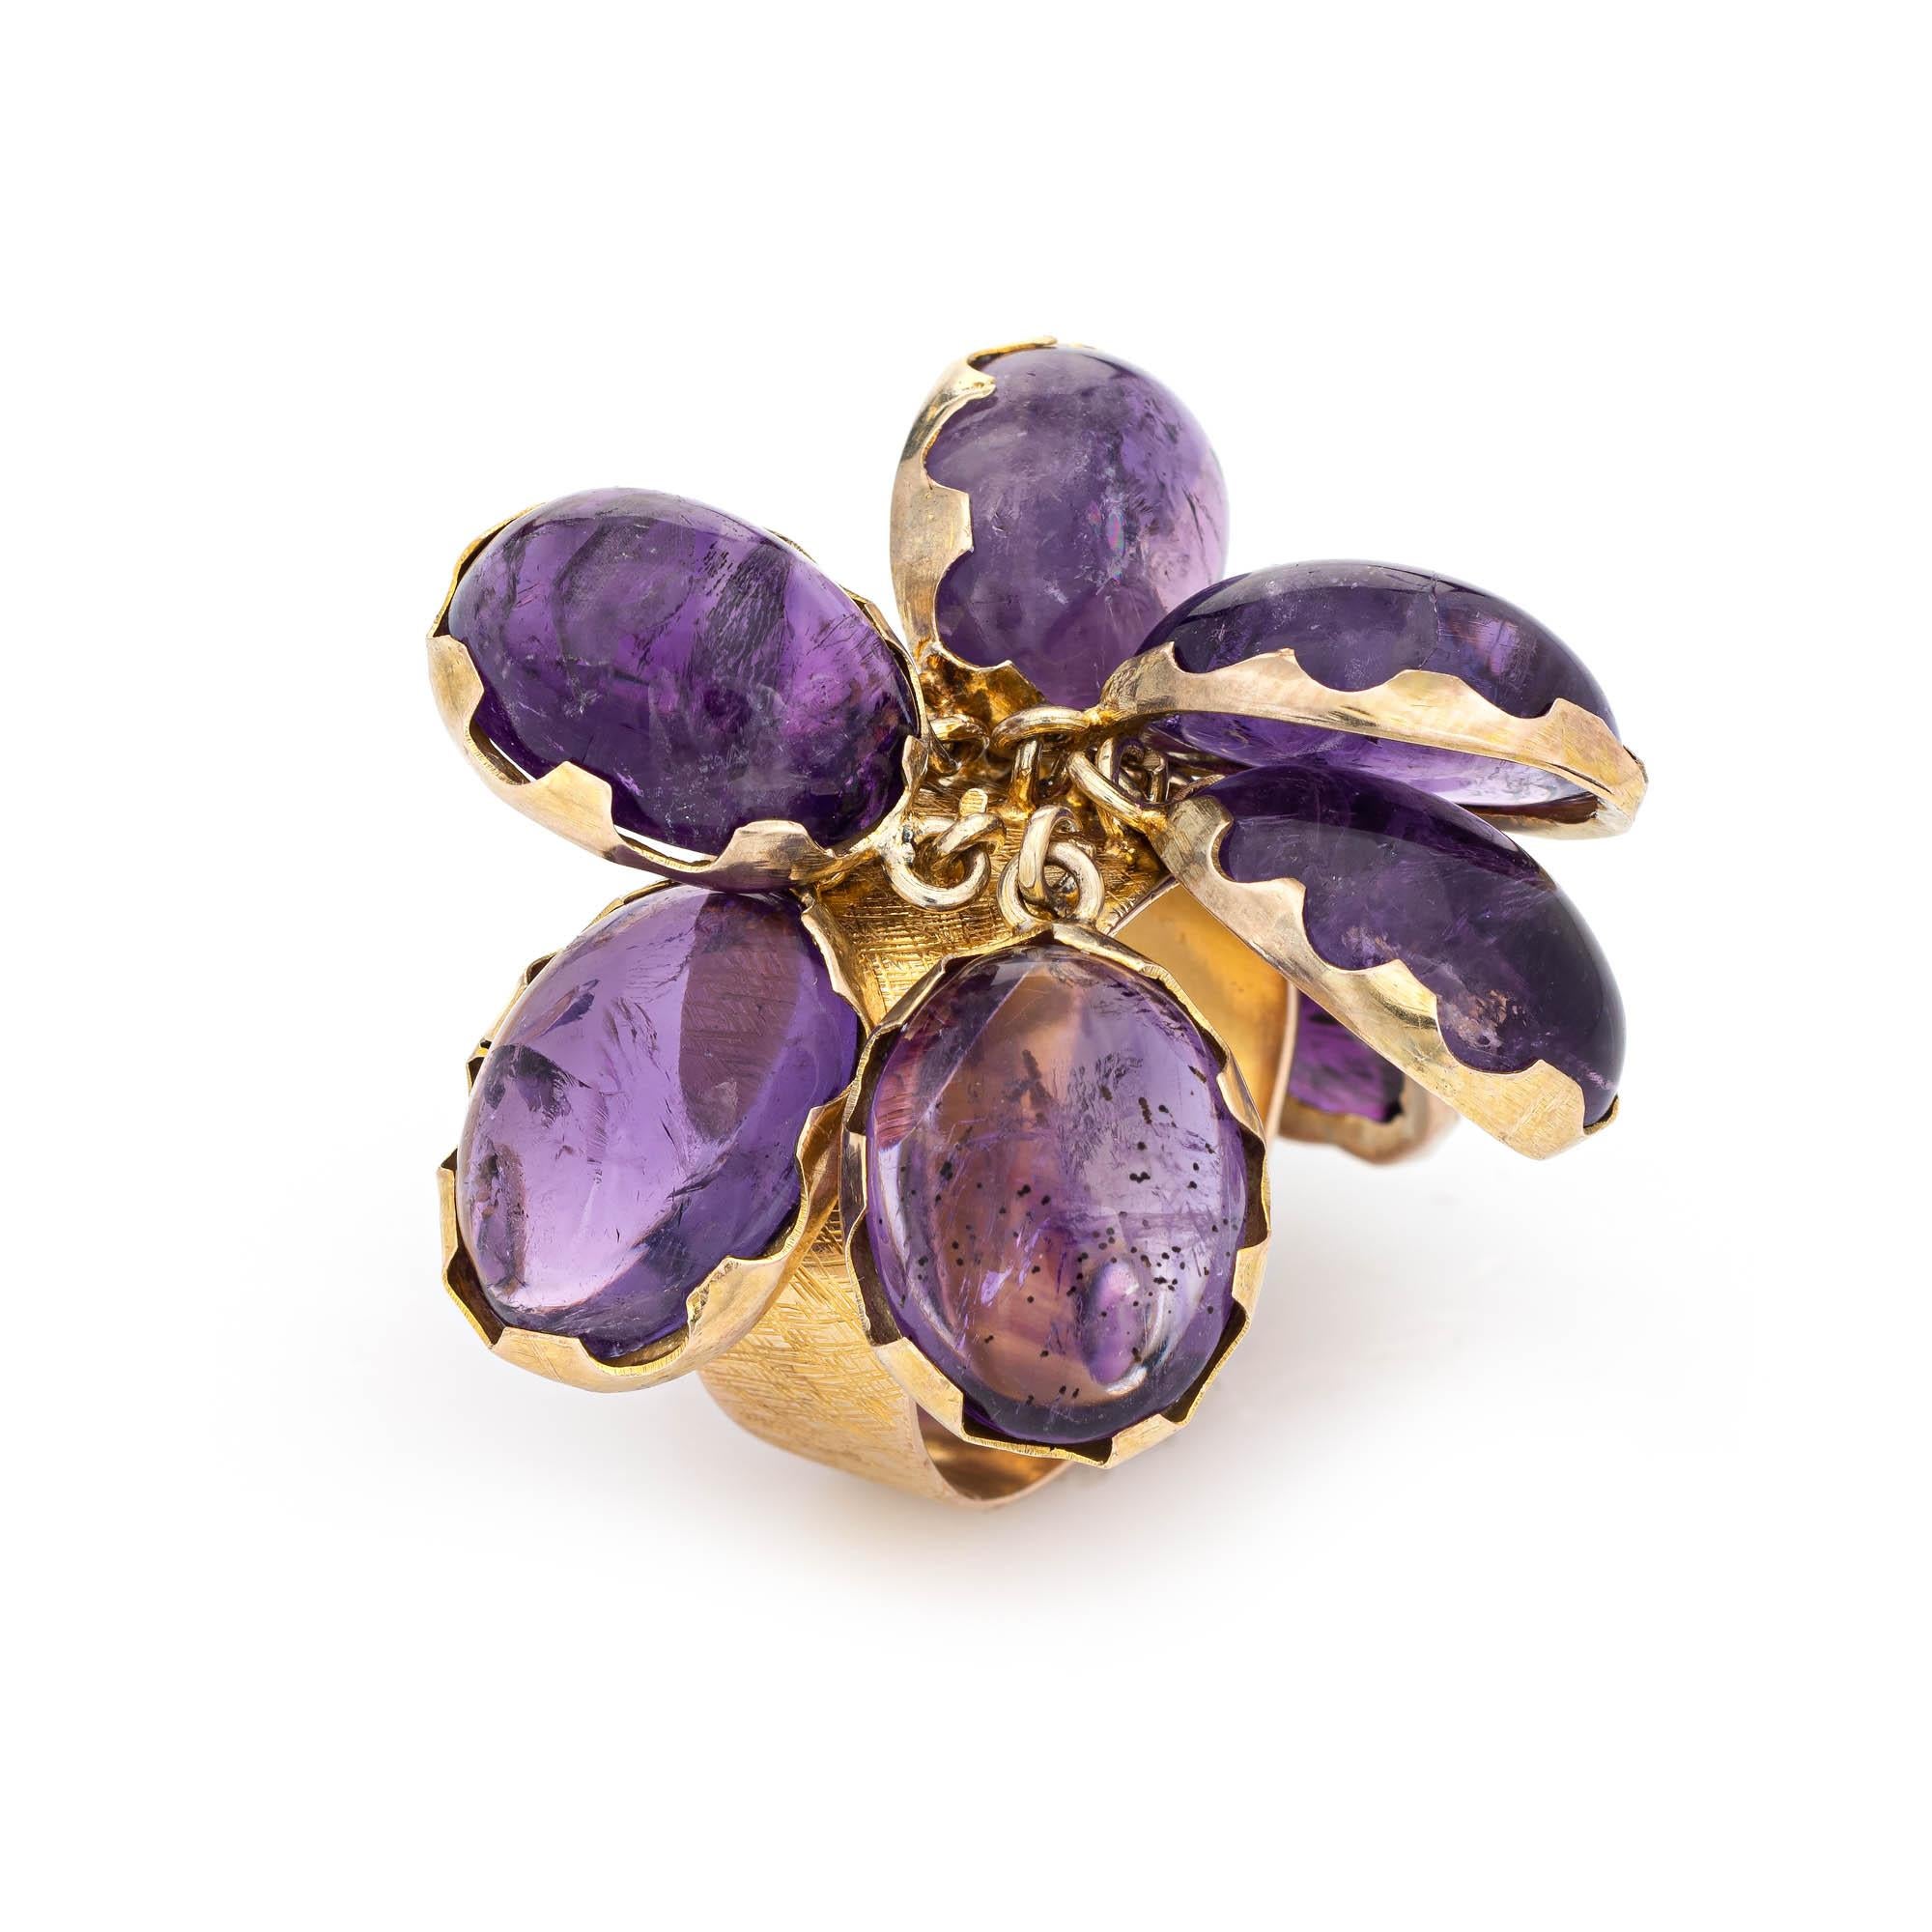 Fun and funky vintage charm ring (circa 1950s to 1960s), crafted in 14 karat yellow gold. 

Amethyst cabochons measure 13mm x 10mm (estimated at 5 carats each - 40 carats total estimated weight). The amethysts are in excellent condition and free of